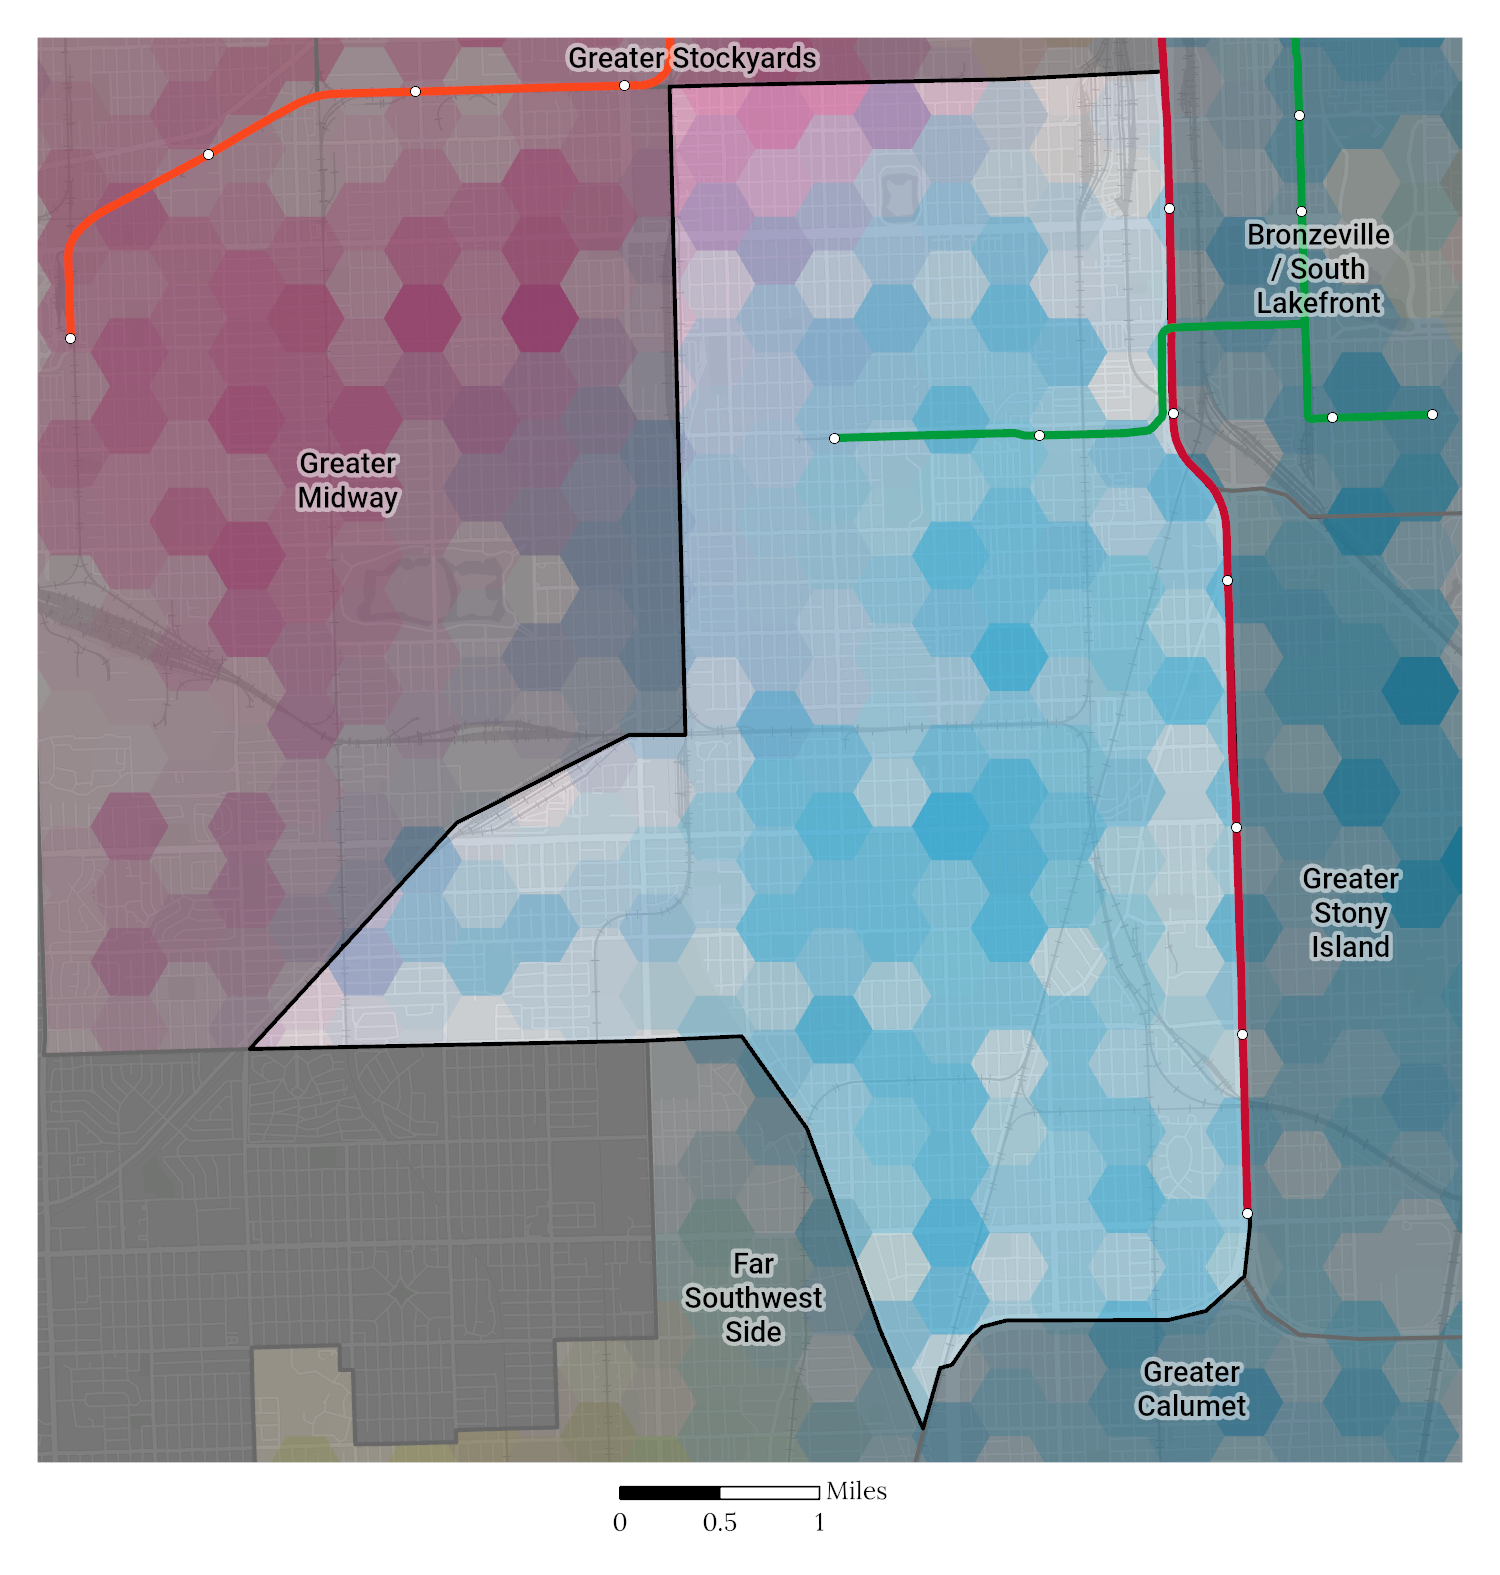 Racial and Ethnic composition map of South Side